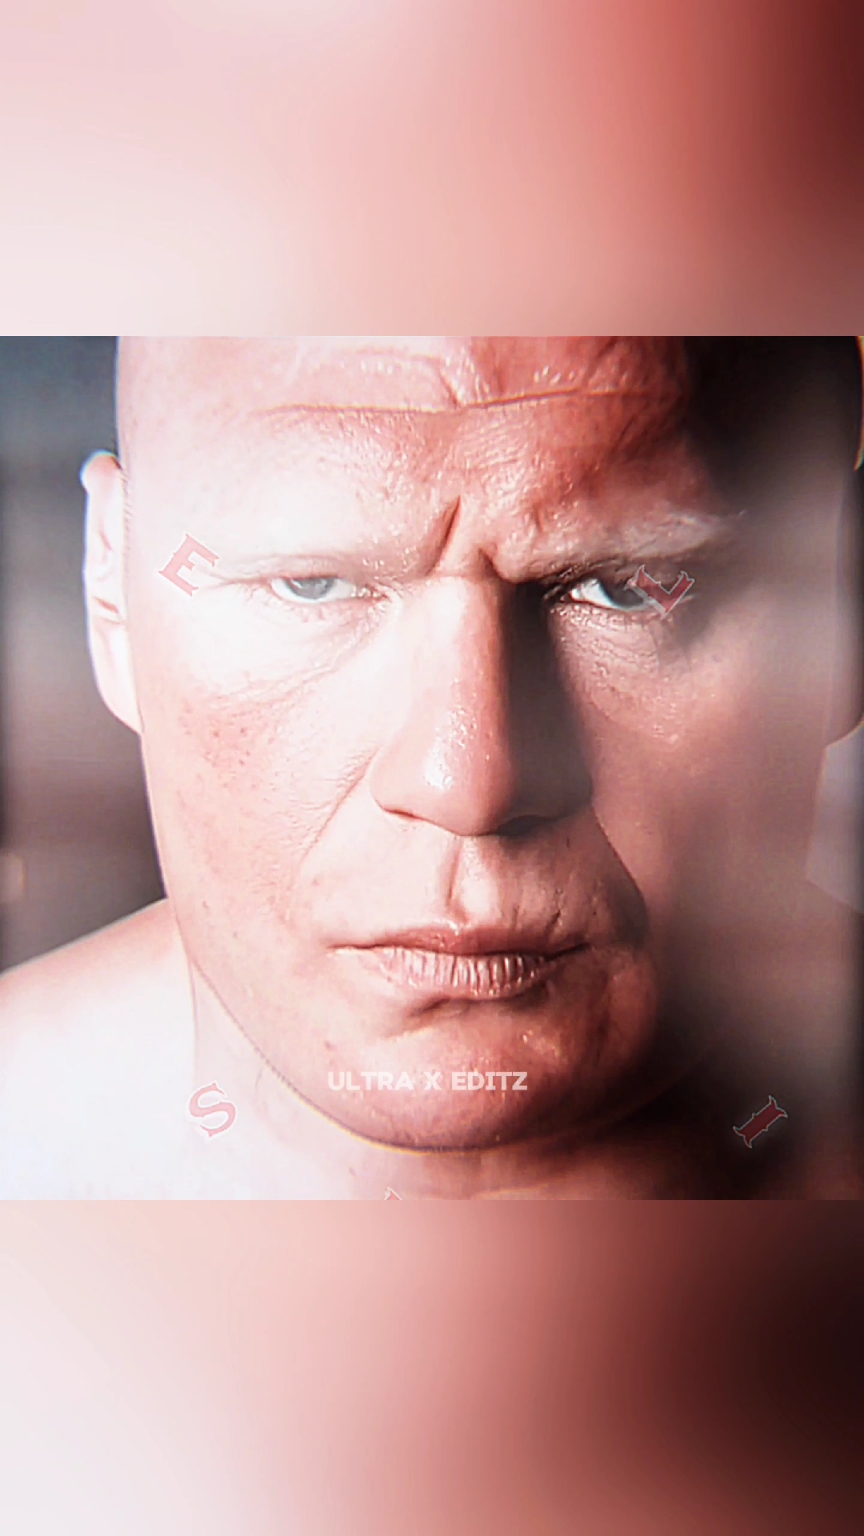 Brock Lesnar Edit 👑❤🔥 // #fyp #foryou #foryoupage #fyppppppppppppppppppppppp #100k #views   #standwithpalastine #tunes_vibes #songtranslation #JohnCena #TripleH #MyYard #smackdown #TheBeast #wwe2k22 #AlexaBliss #CharlotteFlair #WWE #batista #RoyalRumble #ProWrestling #SteveAustin    #TheBeast #wwe2k22 #AlexaBliss #CharlotteFlair #WWE #batista #RoyalRumble #ProWrestling #steveaustin #paigewwe #RAW #SDLive #suplexcity #wwepaige #brocklesnar  #CharlotteFlair #WWE #batista #RoyalRumble #ProWrestling #steveaustin #steveaustin #ProWrestling #RoyalRumble #batista #WWE #CharlotteFlair #johncena #retirement #sad #edit #johncena 